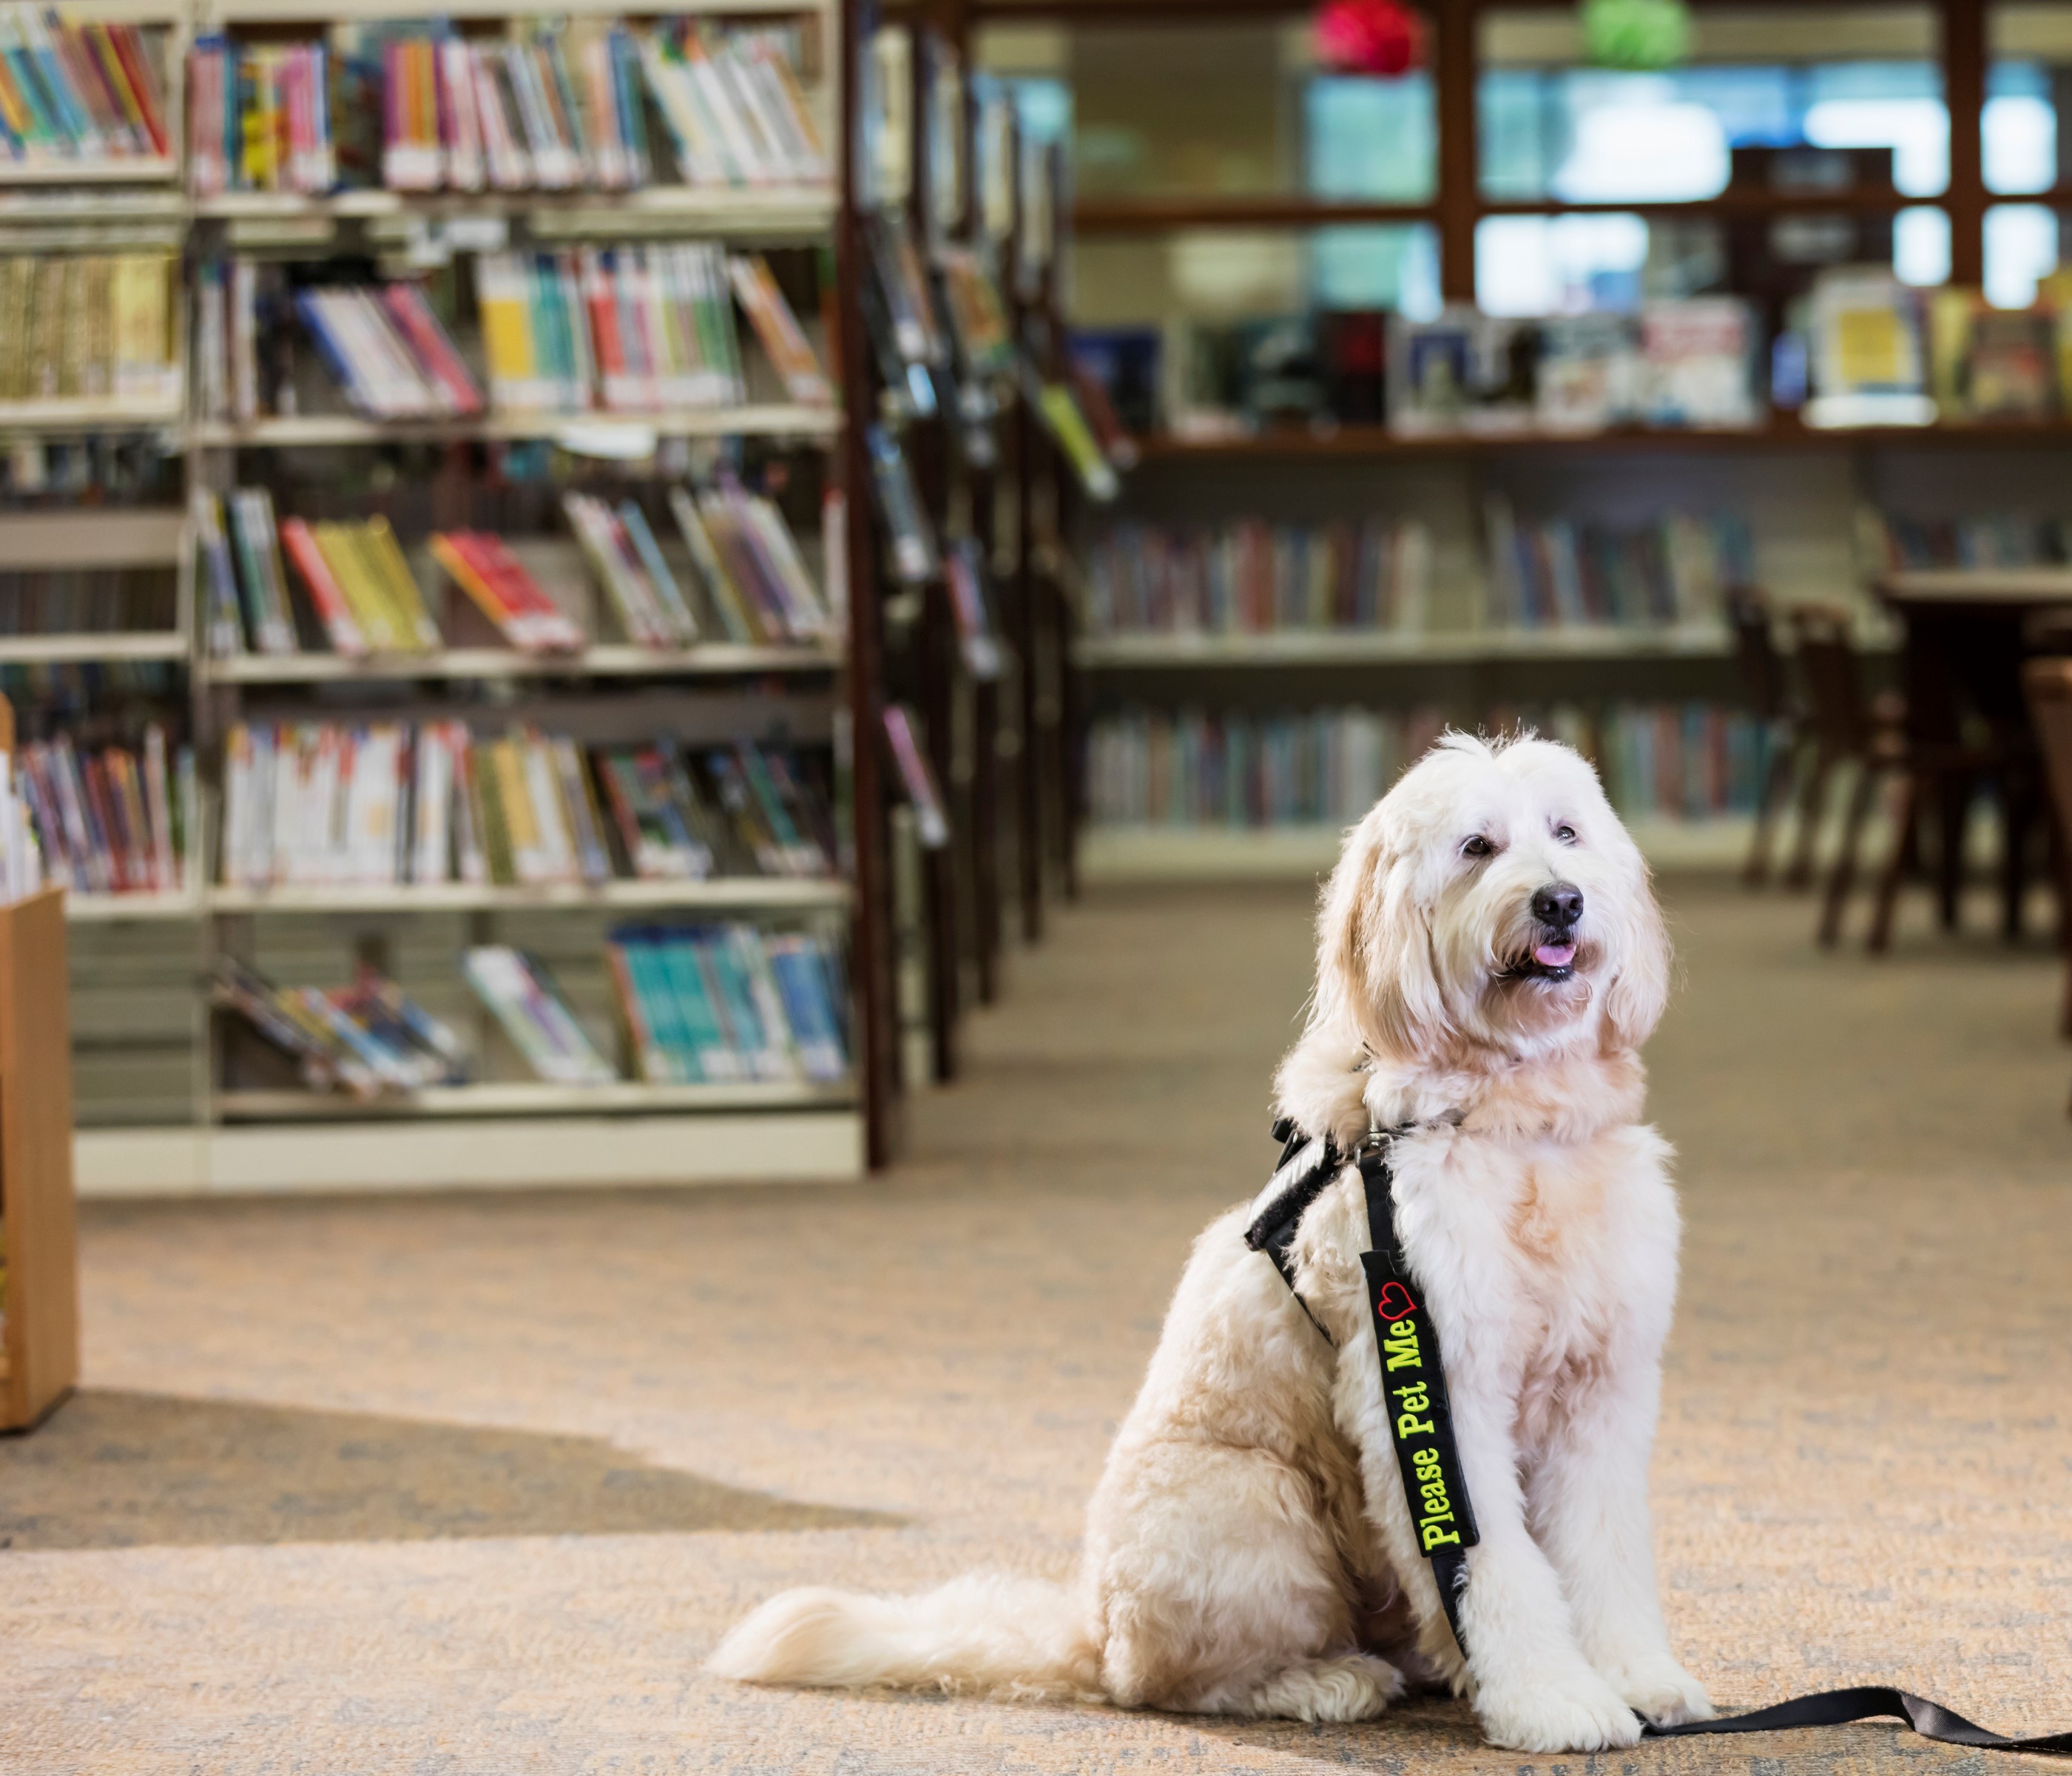 Photograph of a therapy dog sitting in a library.